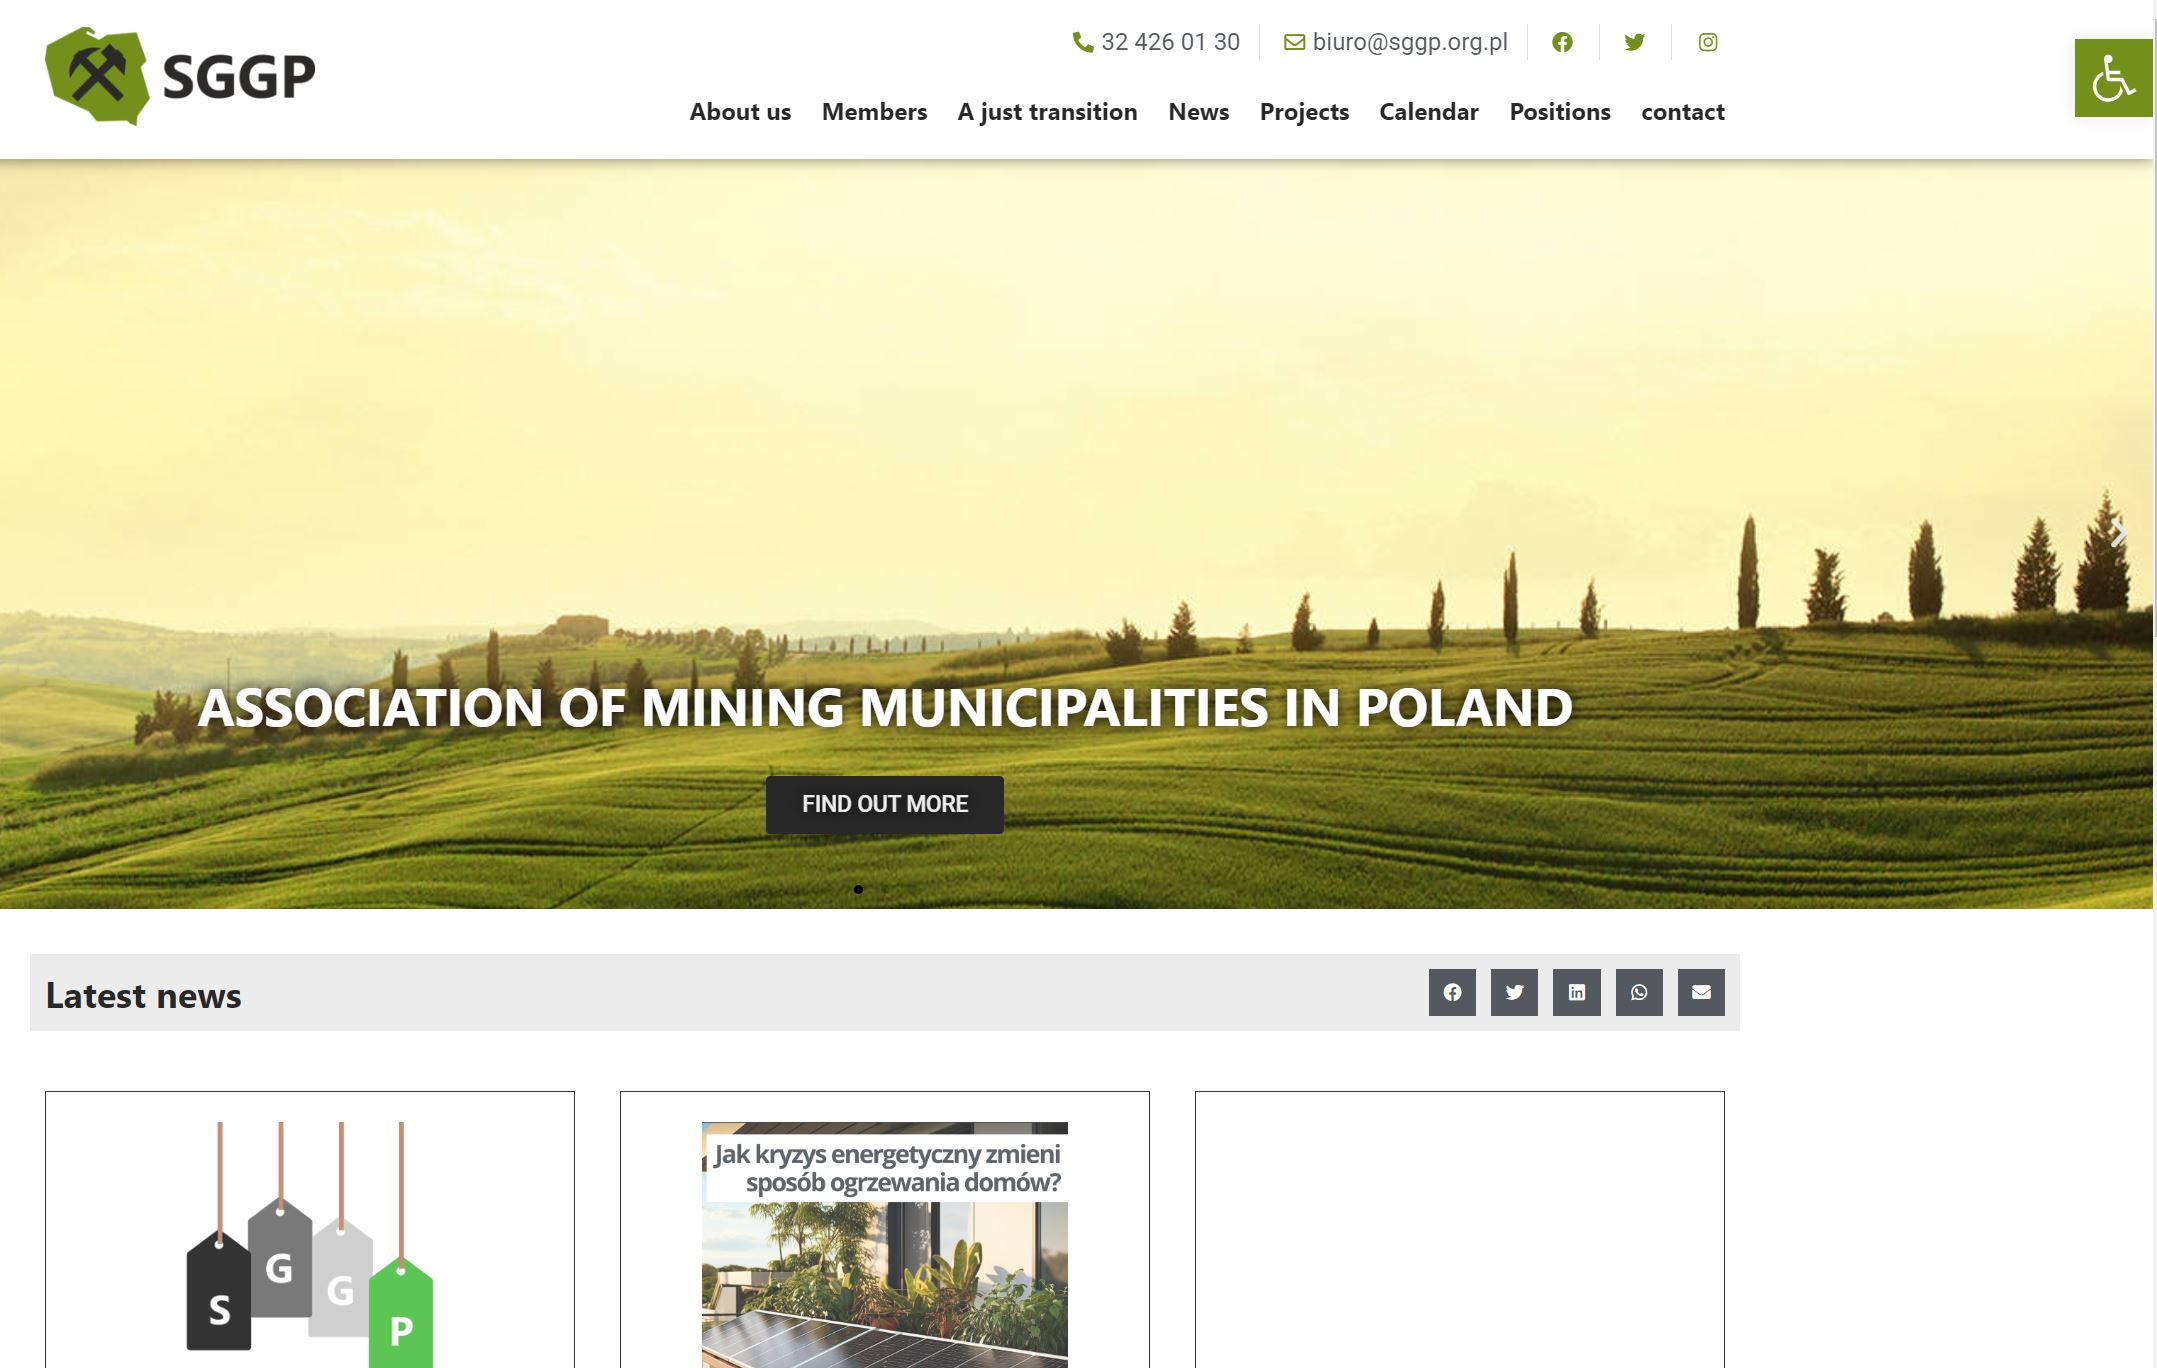 Partnership with the Association of Mining Communes in Poland